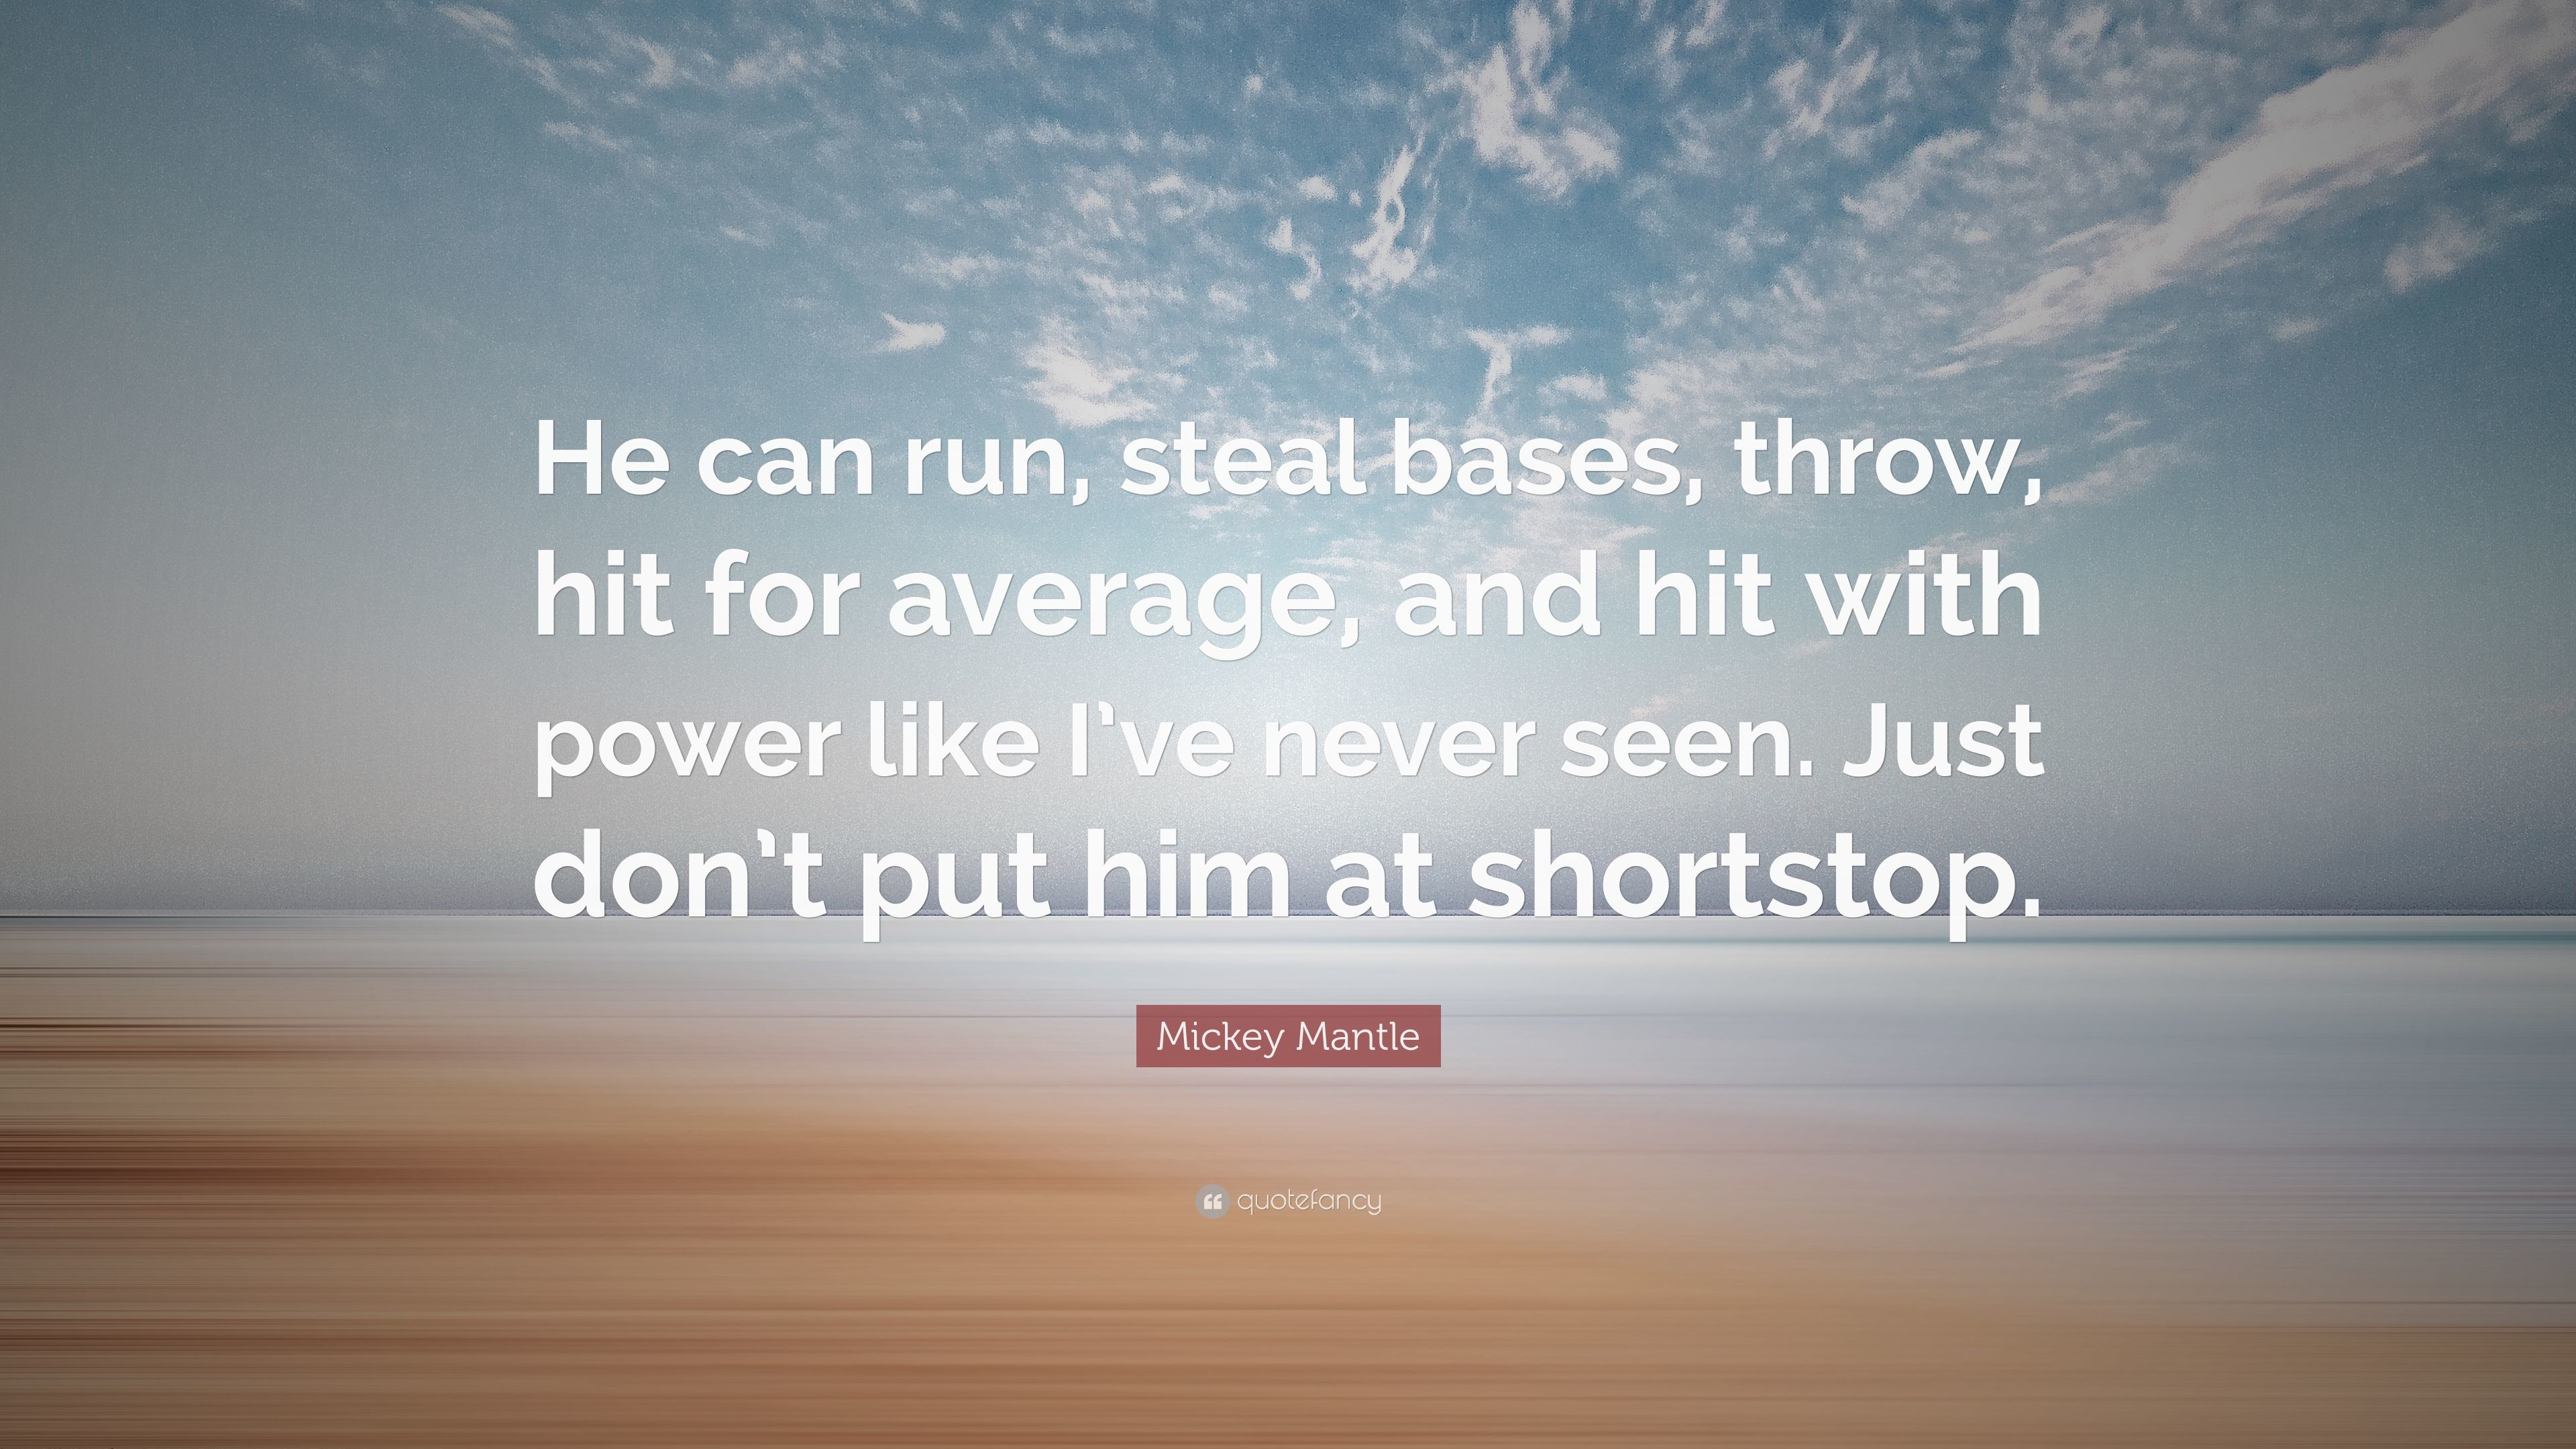 3840x2160 Mickey Mantle Quote: “He can run, steal bases, throw, hit for